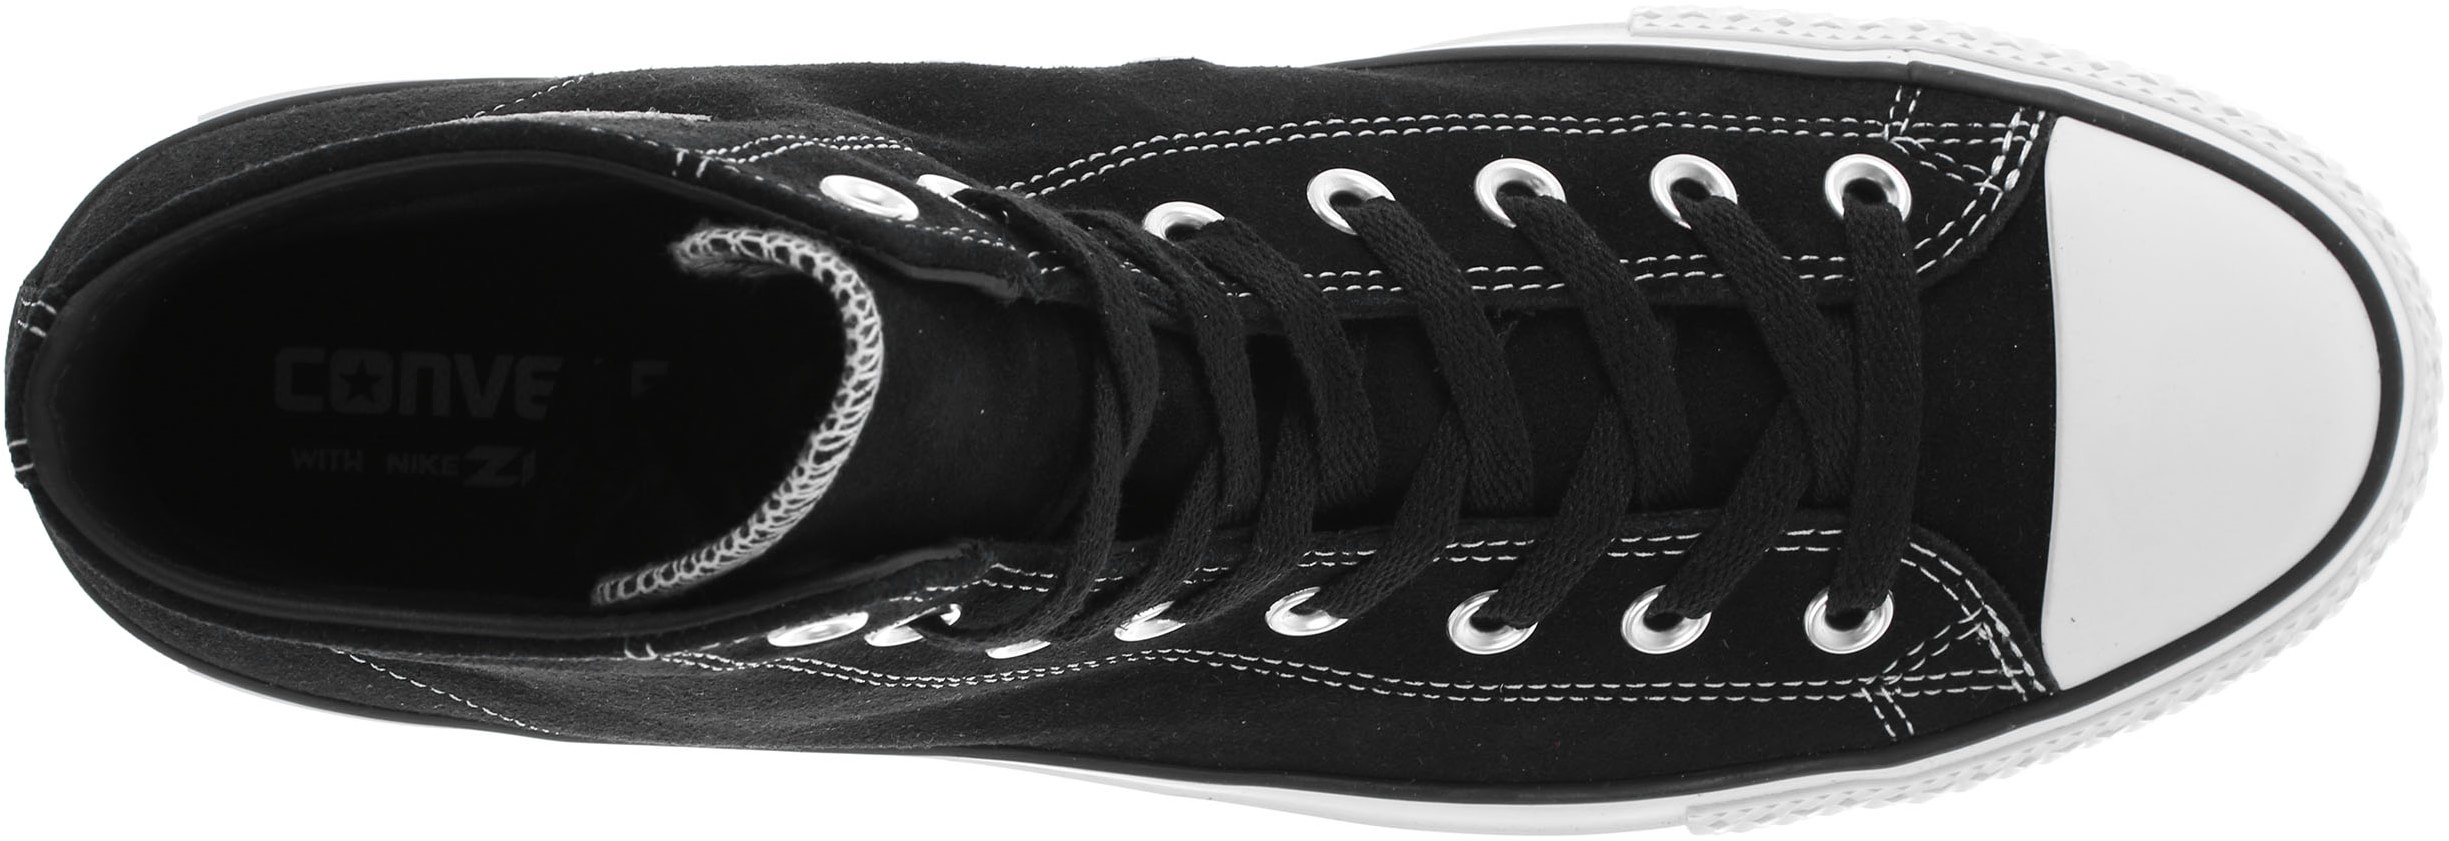 Converse Chuck Taylor All Star Pro High Skate Shoes - (suede) black ...